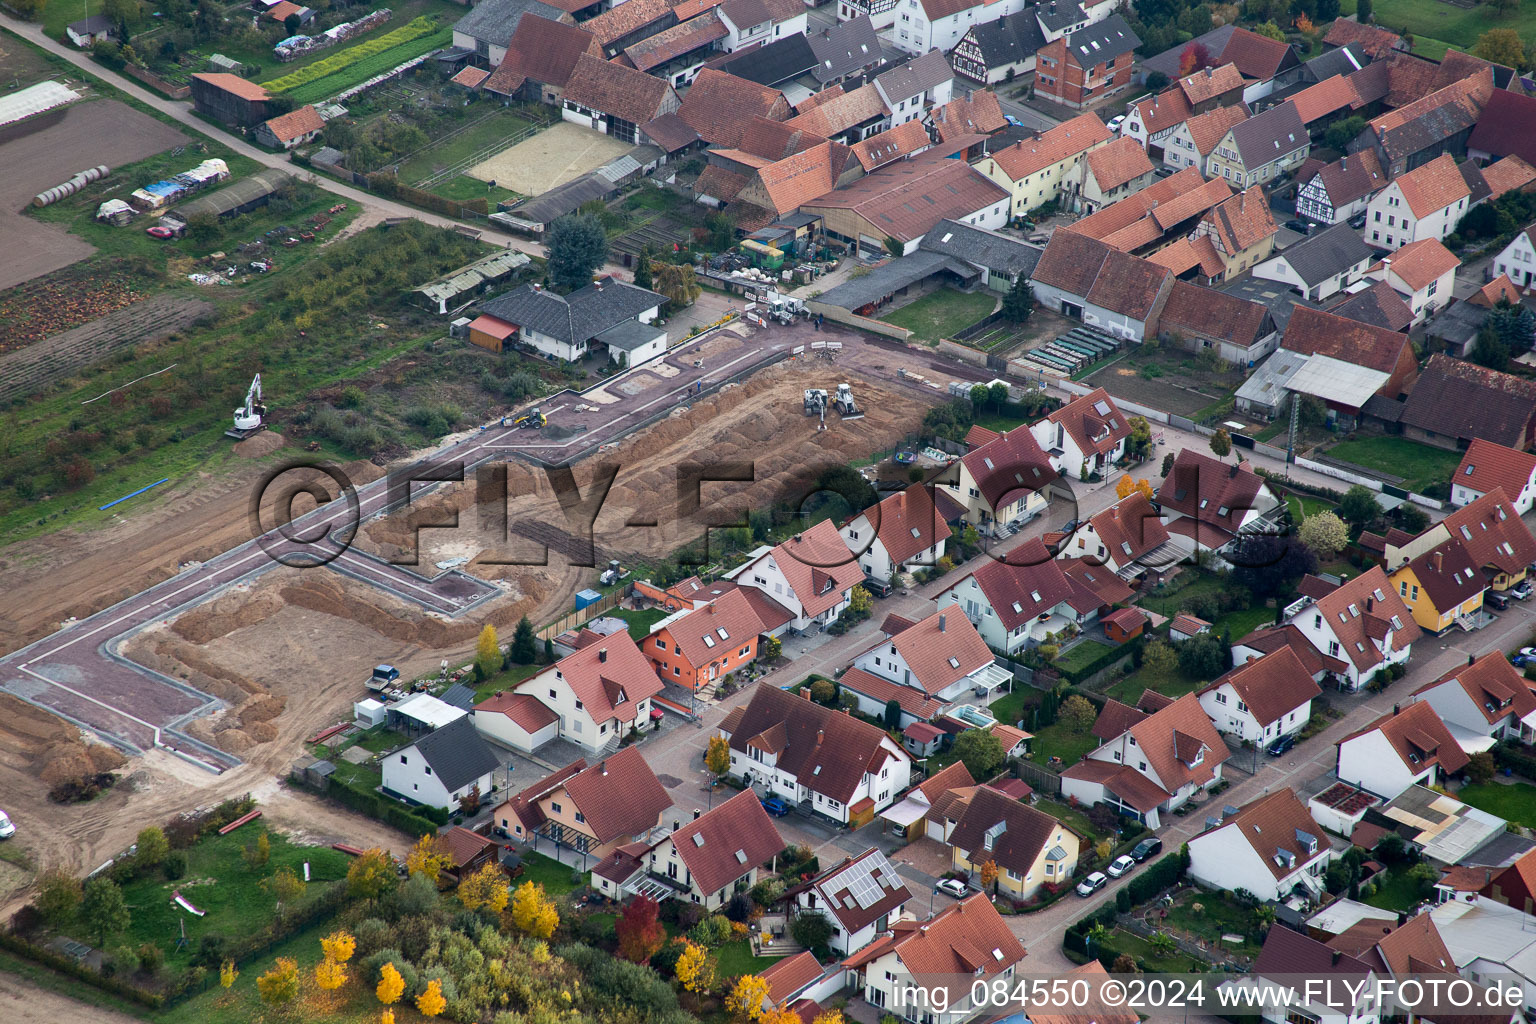 Aerial view of New development area in d. Gardening in Erlenbach bei Kandel in the state Rhineland-Palatinate, Germany